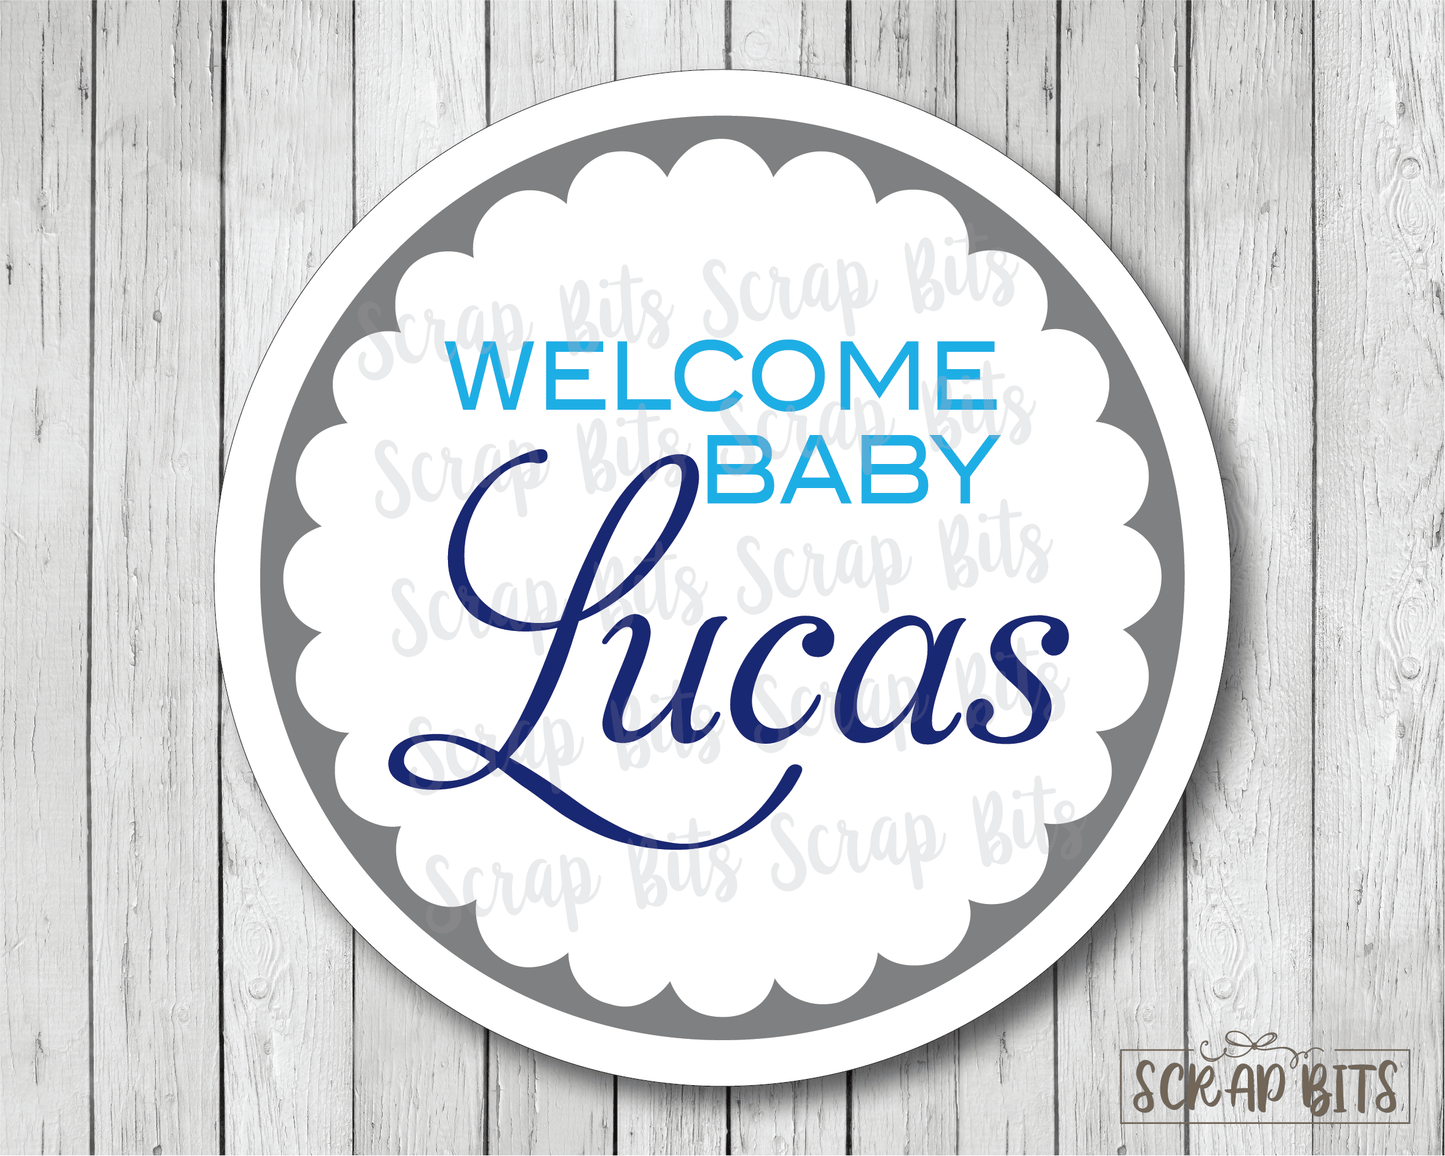 Welcome Baby Script . Baby Shower Stickers or Tags - Scrap Bits